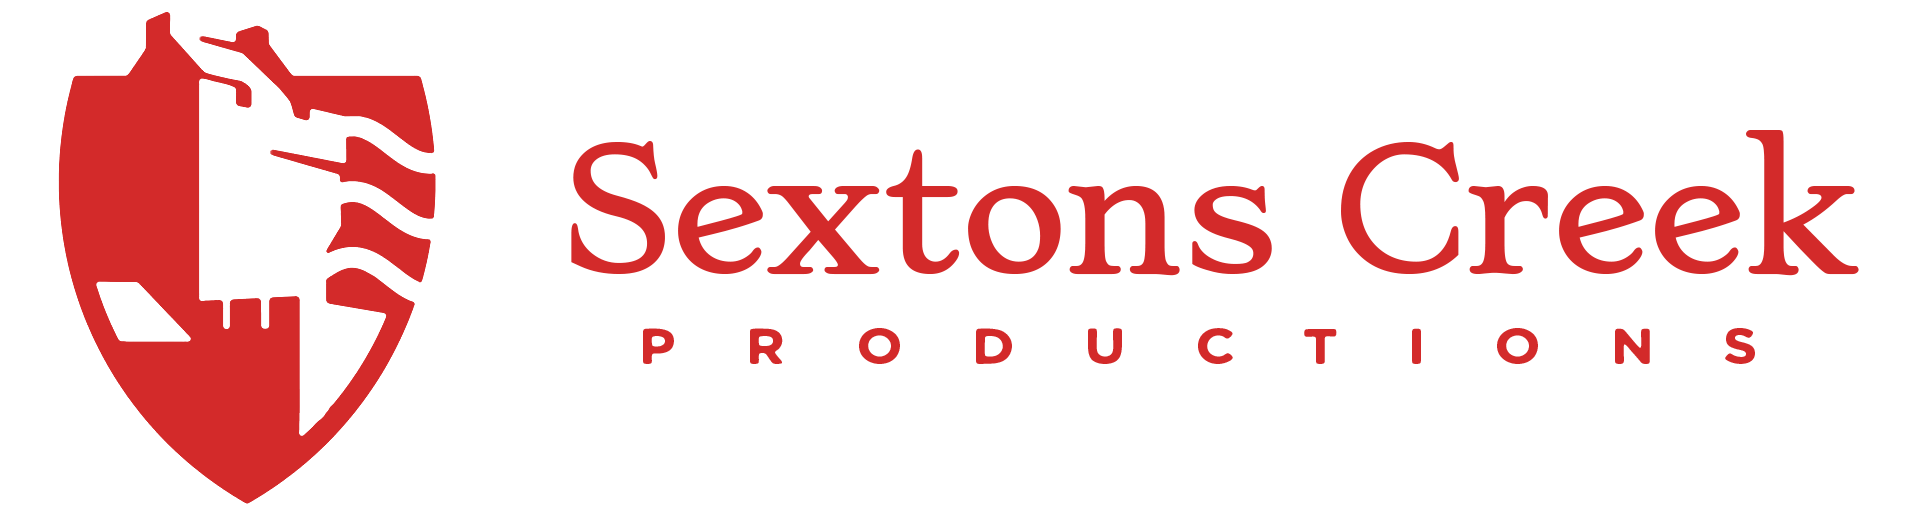 Sextons Creek Productions